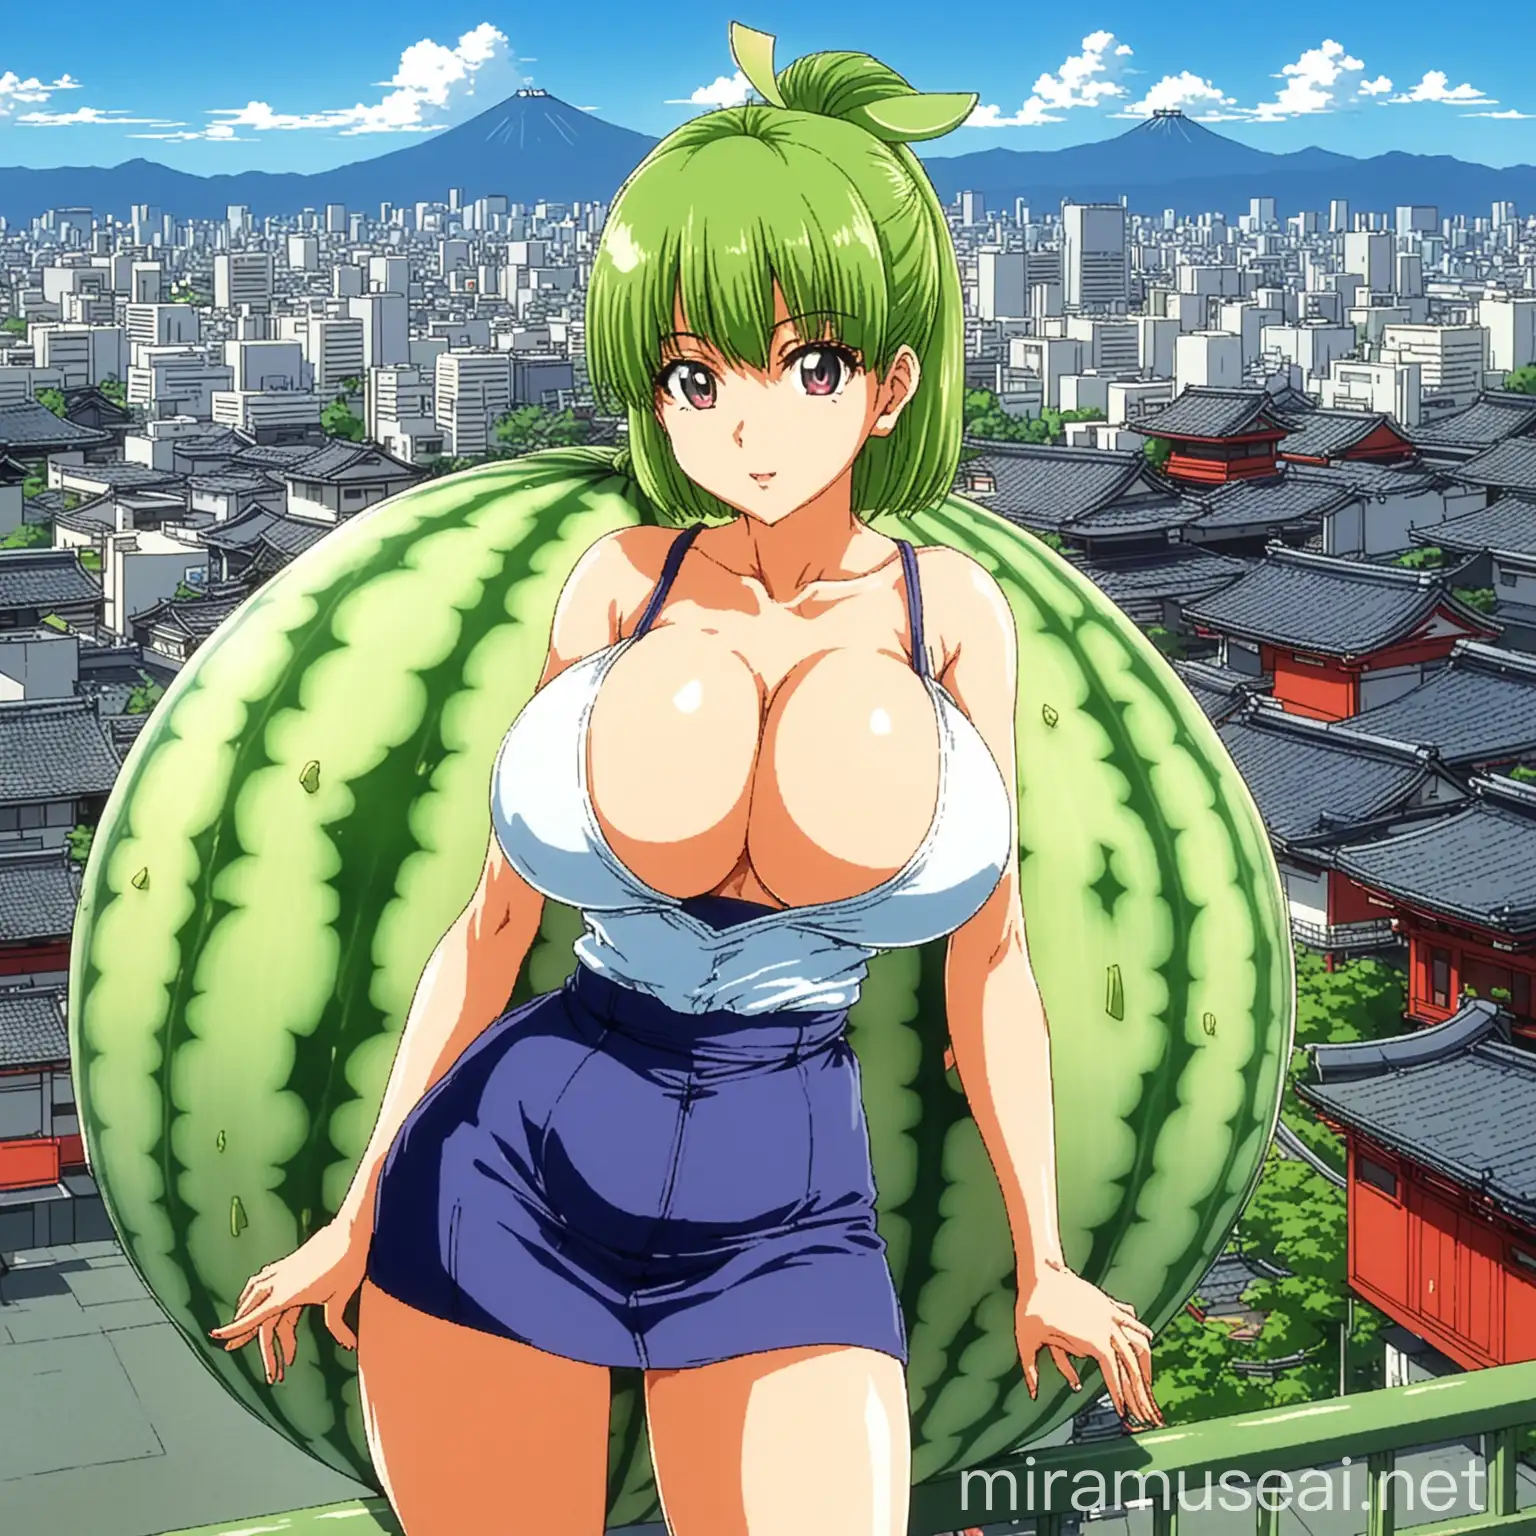 honeydew melon themed big titty anime girl with 90's japan city background